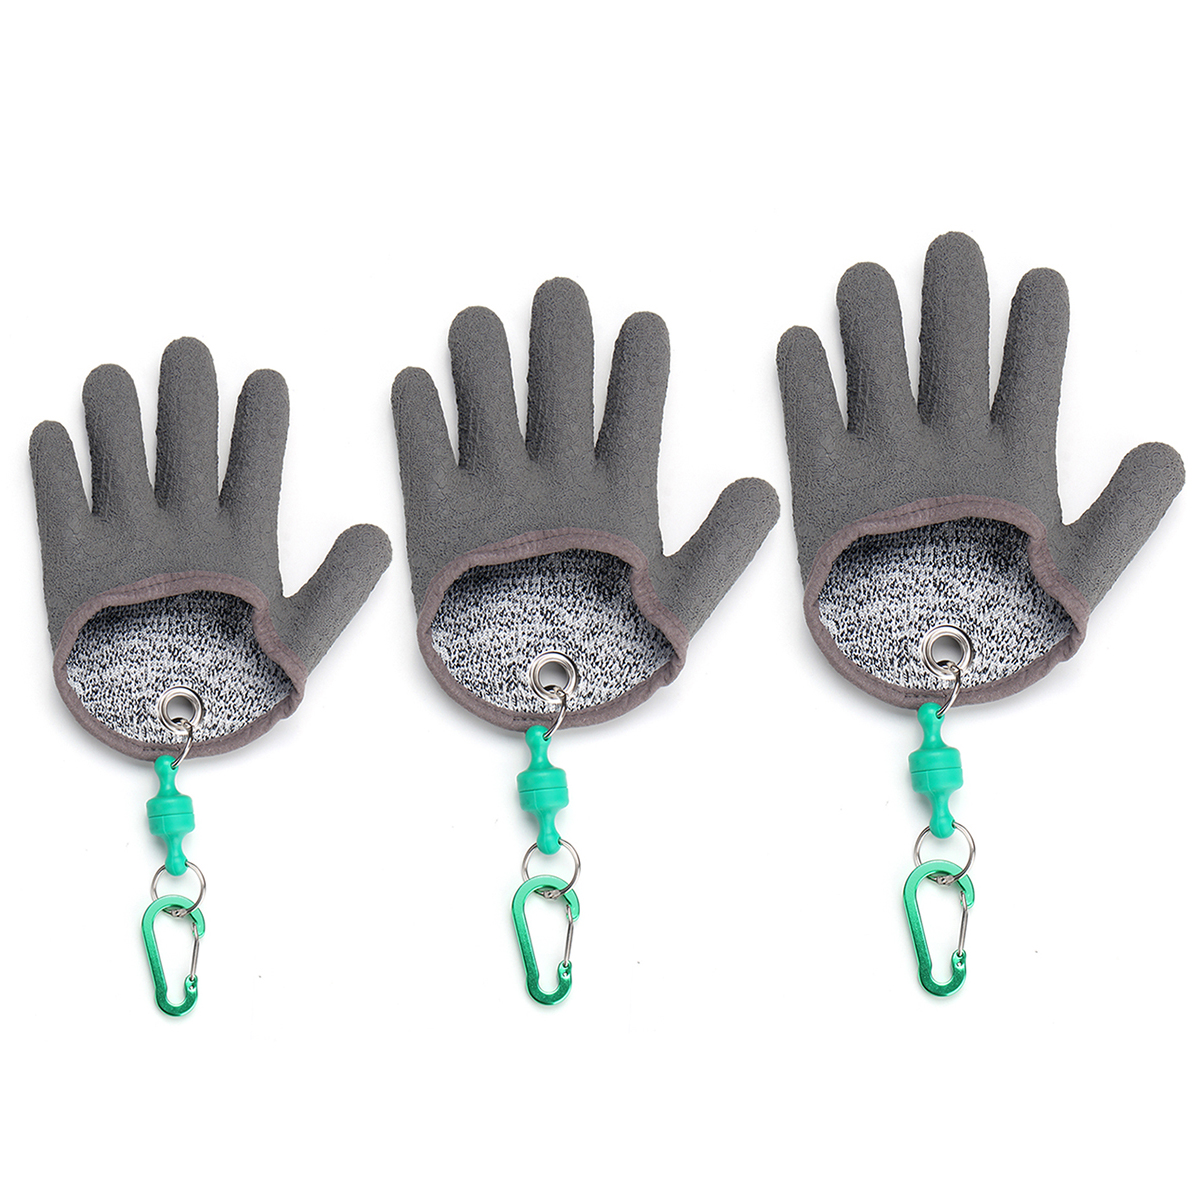 1pc-MLXL-Grey-Left-Cut-Resistant-Fishing-Glove-Protective-Safety-Gloves-Knife-Slash-Proof-Gloves-1335684-4